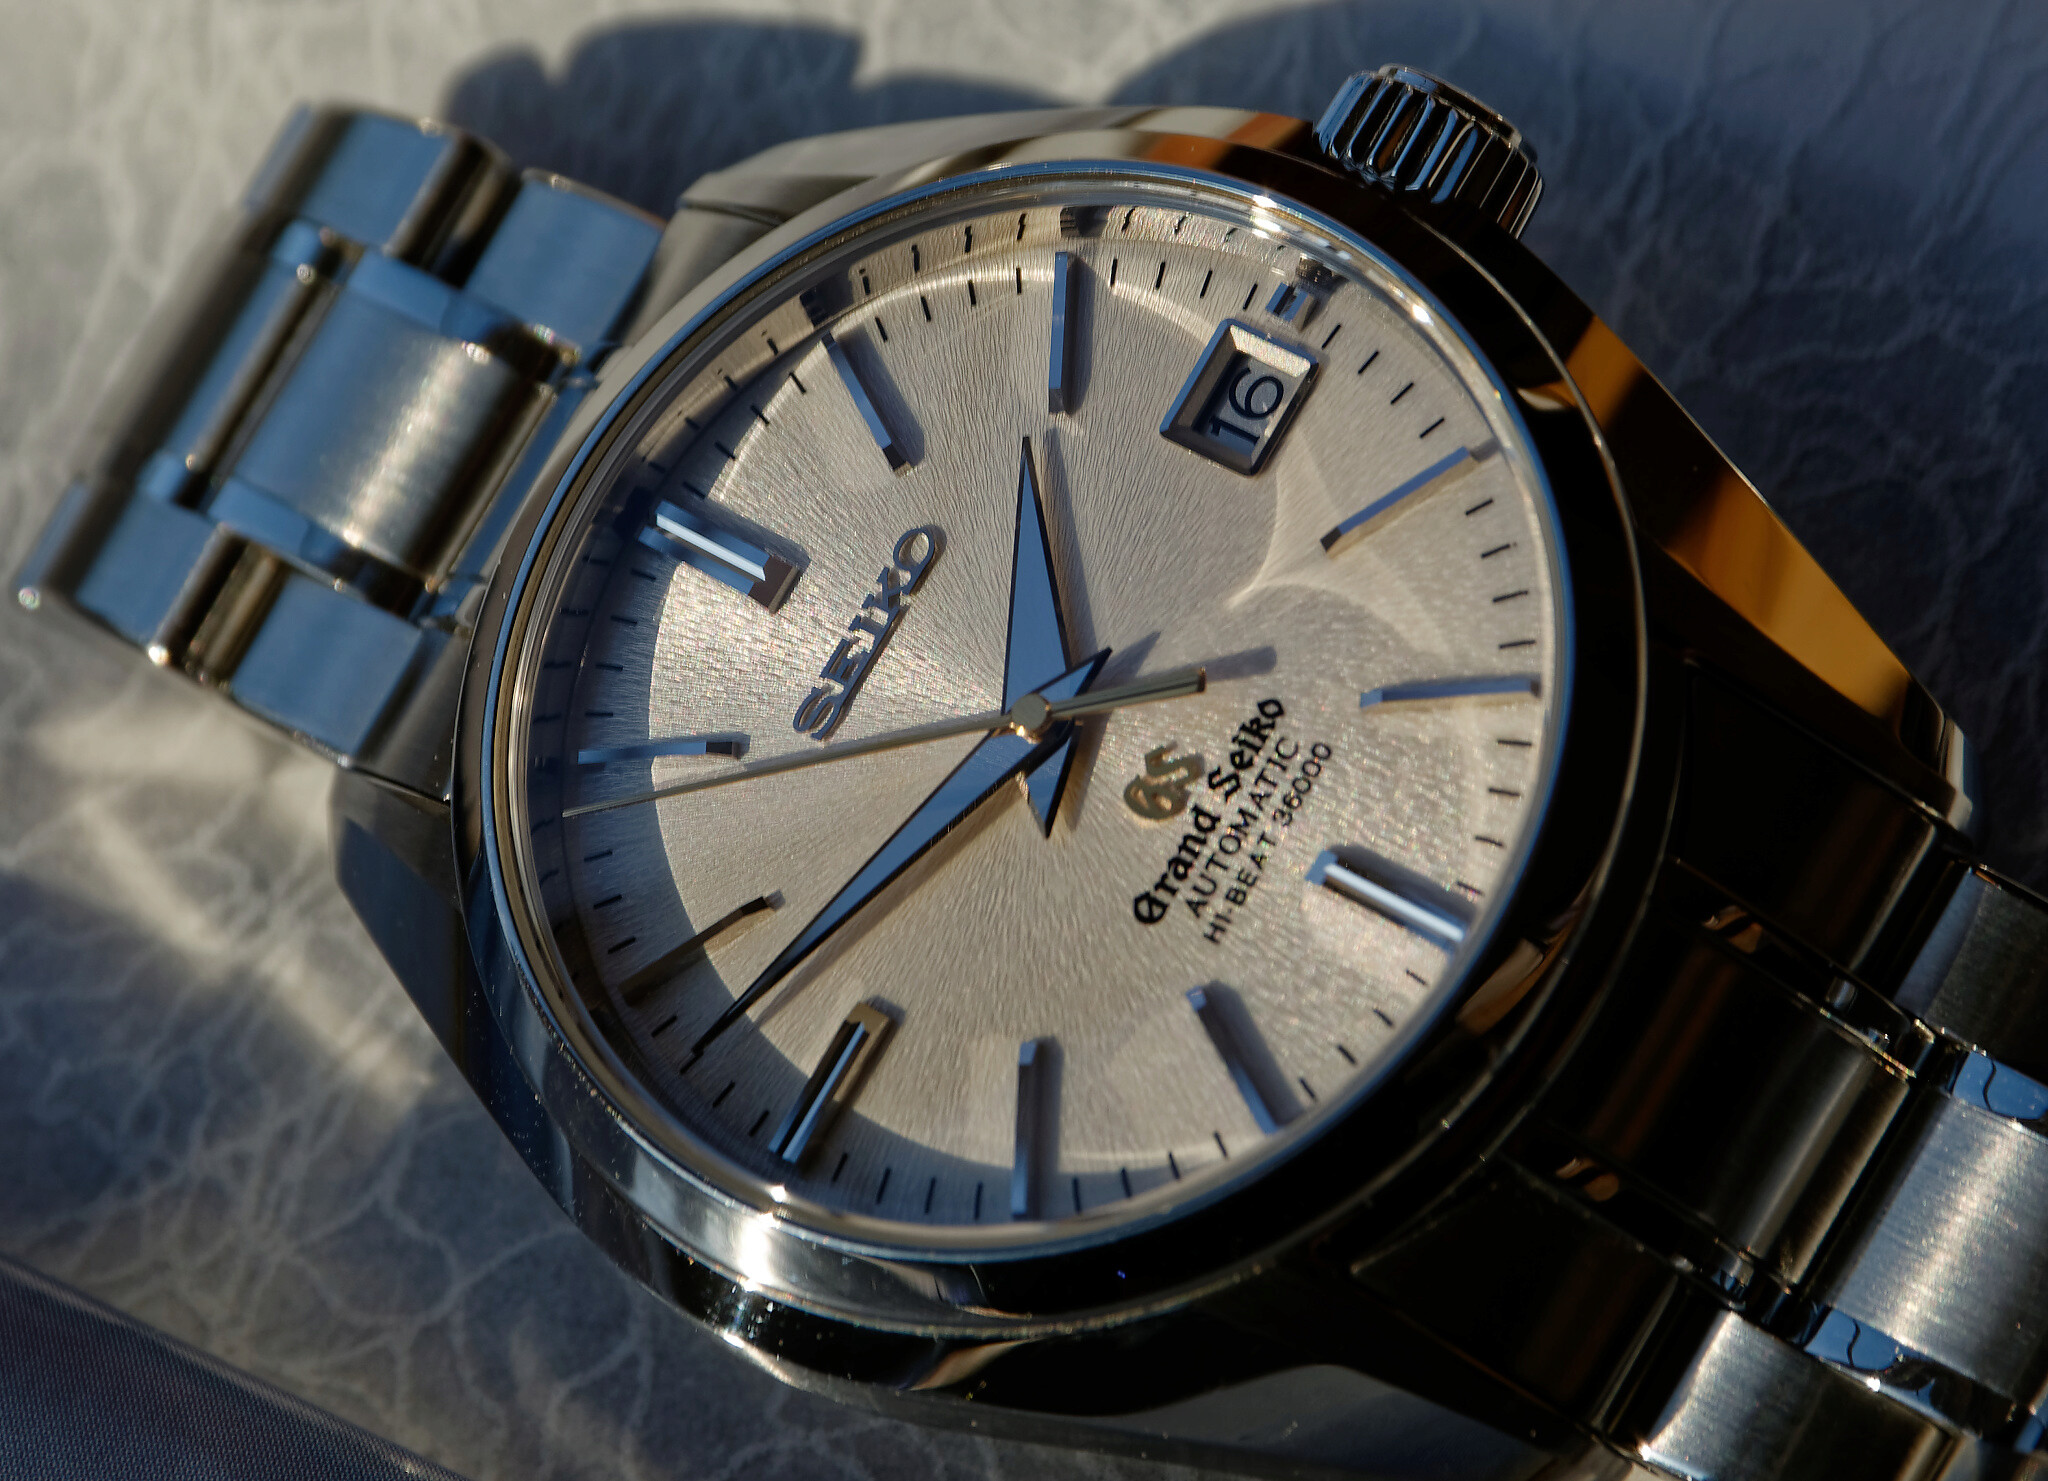 Your GS collection - and more important; why GS? | Page 3 | WatchUSeek  Watch Forums